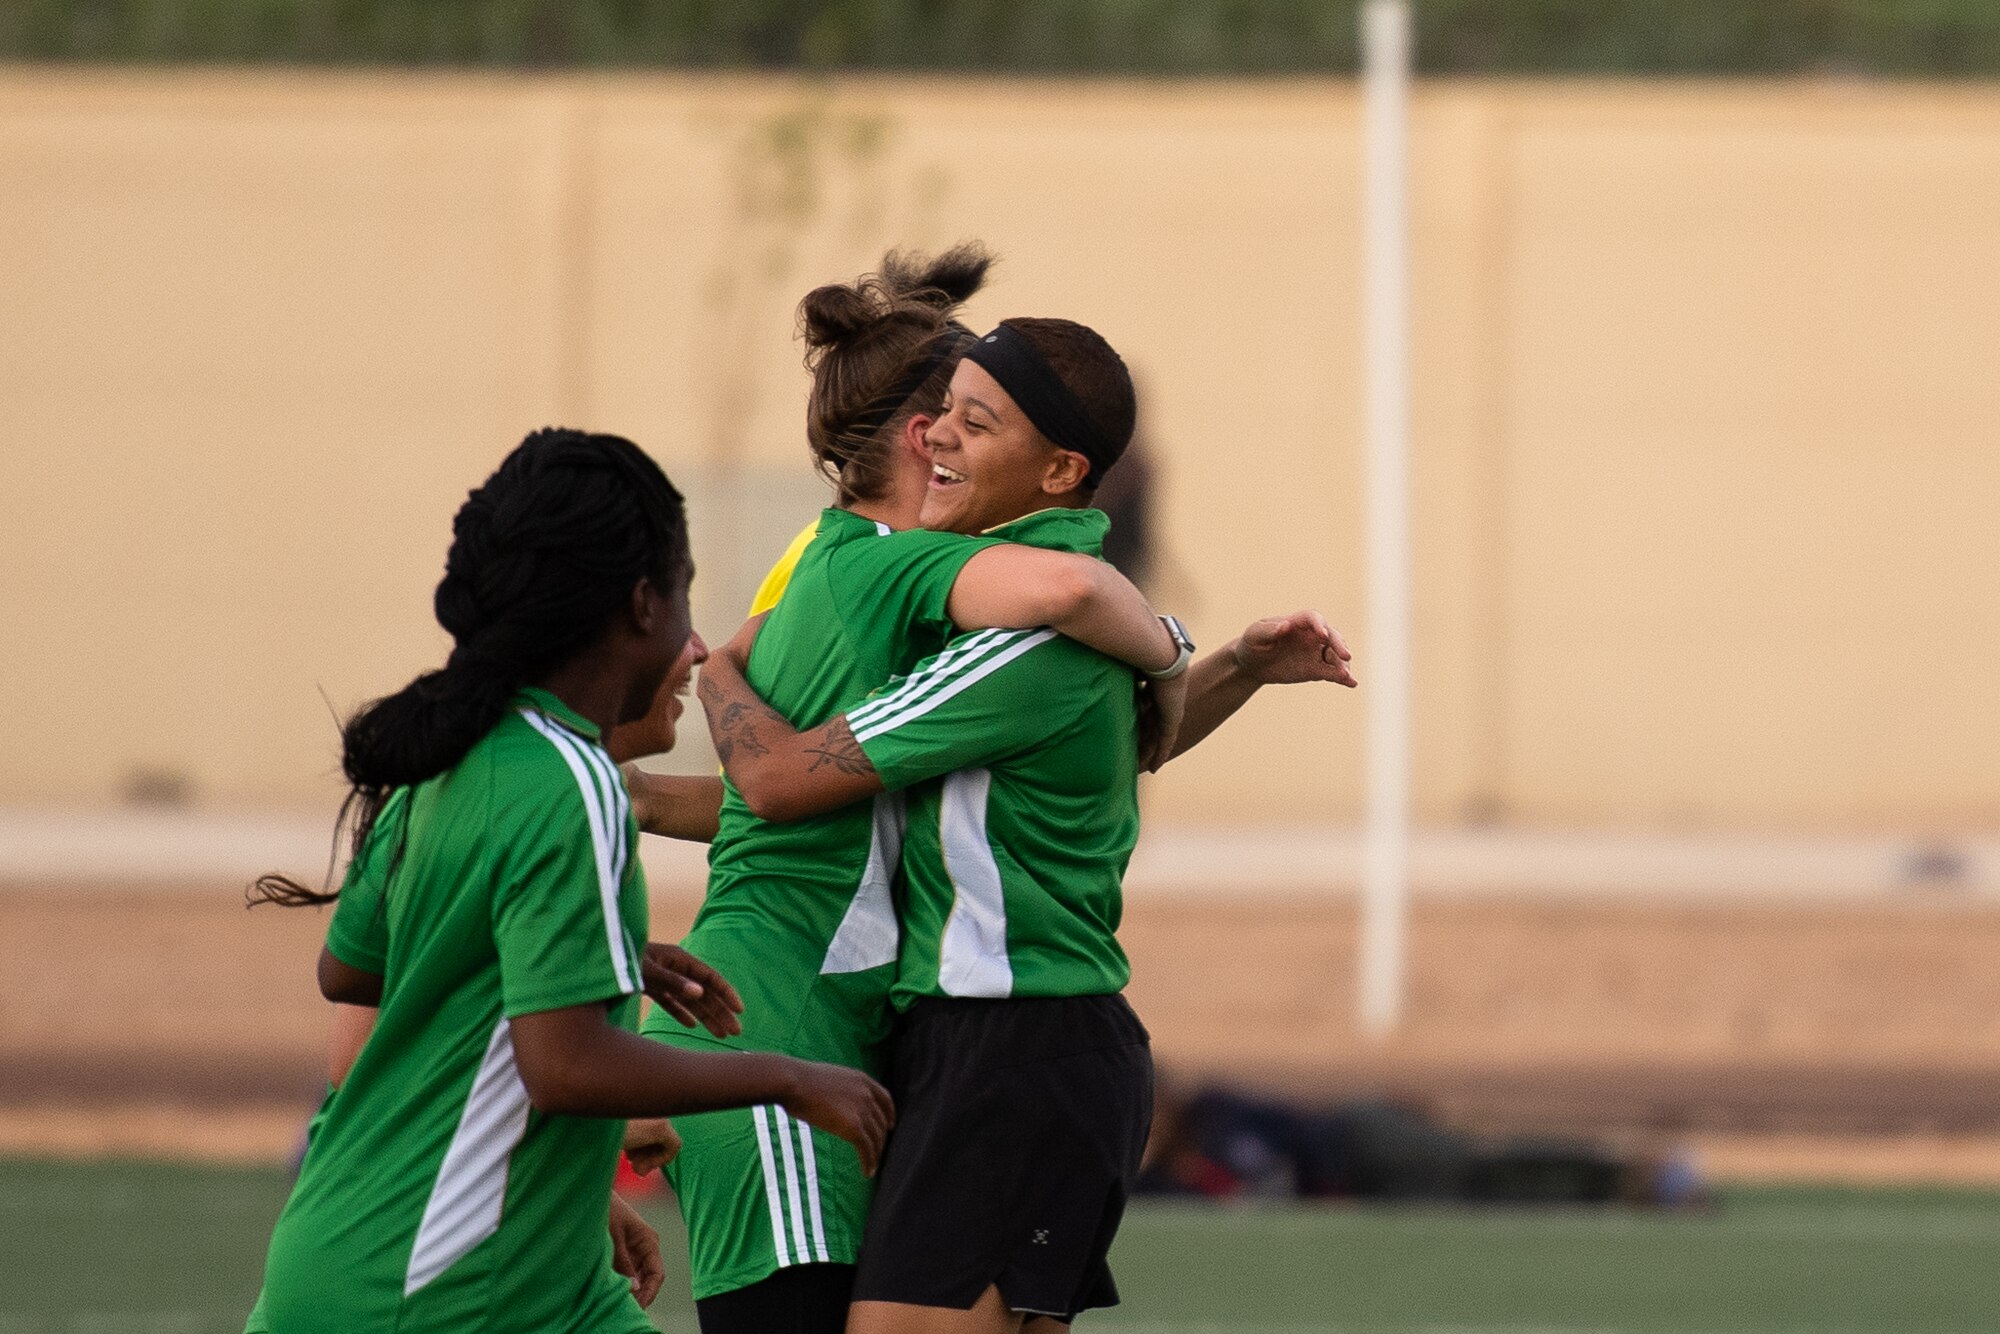 U.S. Air Force Master Sgt. Heather Dragon, 724th Expeditionary Air Base Squadron personnel support for contingency operations member, left, embraces Senior Airman Lexis French, 724th EABS services member, right, after scoring a goal during a recreational game between Nigerien Air Base 201 and the Nassara Athletic Club Women’s Soccer Team at the Agadez Sports Stadium in Agadez, Niger, July 5, 2019. The civil affairs team held the game to build rapport and promote positive sentiment between the local community and AB 201 personnel. (U.S. Air Force photo by Staff Sgt. Devin Boyer)